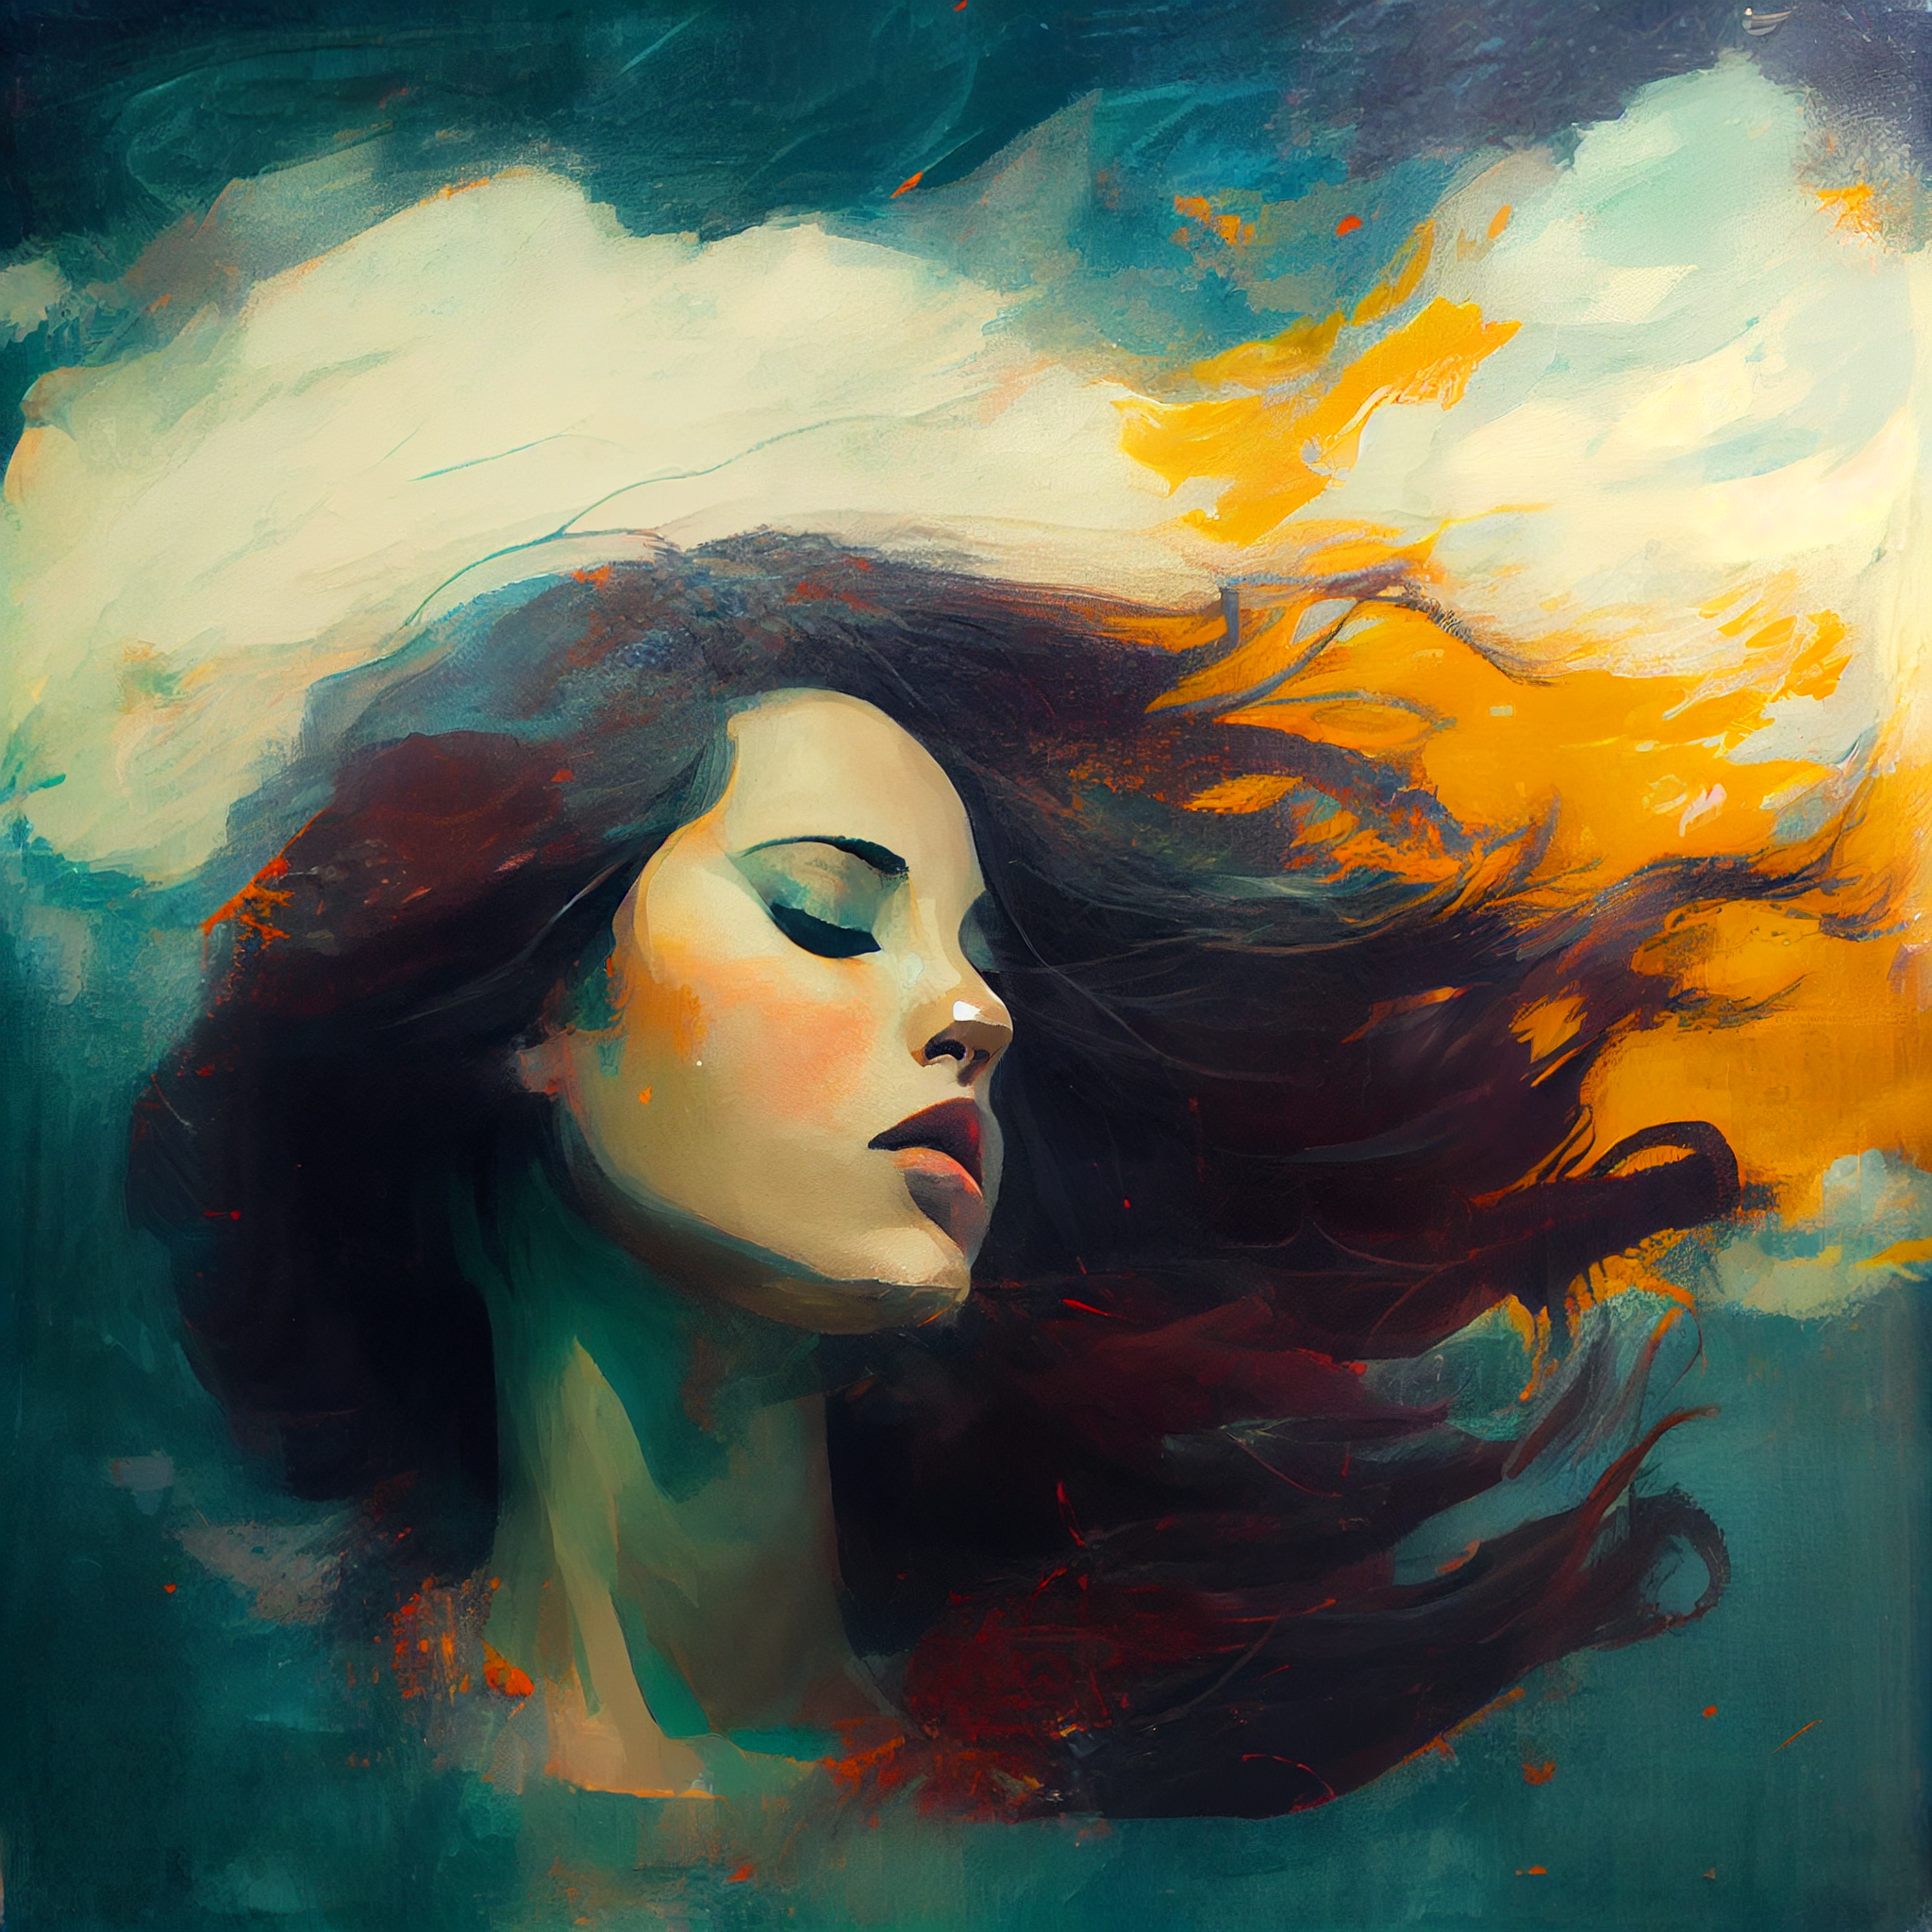 Unleashing Imagination: Modern Oil Painting Print of a Dreaming Woman with Flowing Hair and No Facial Features